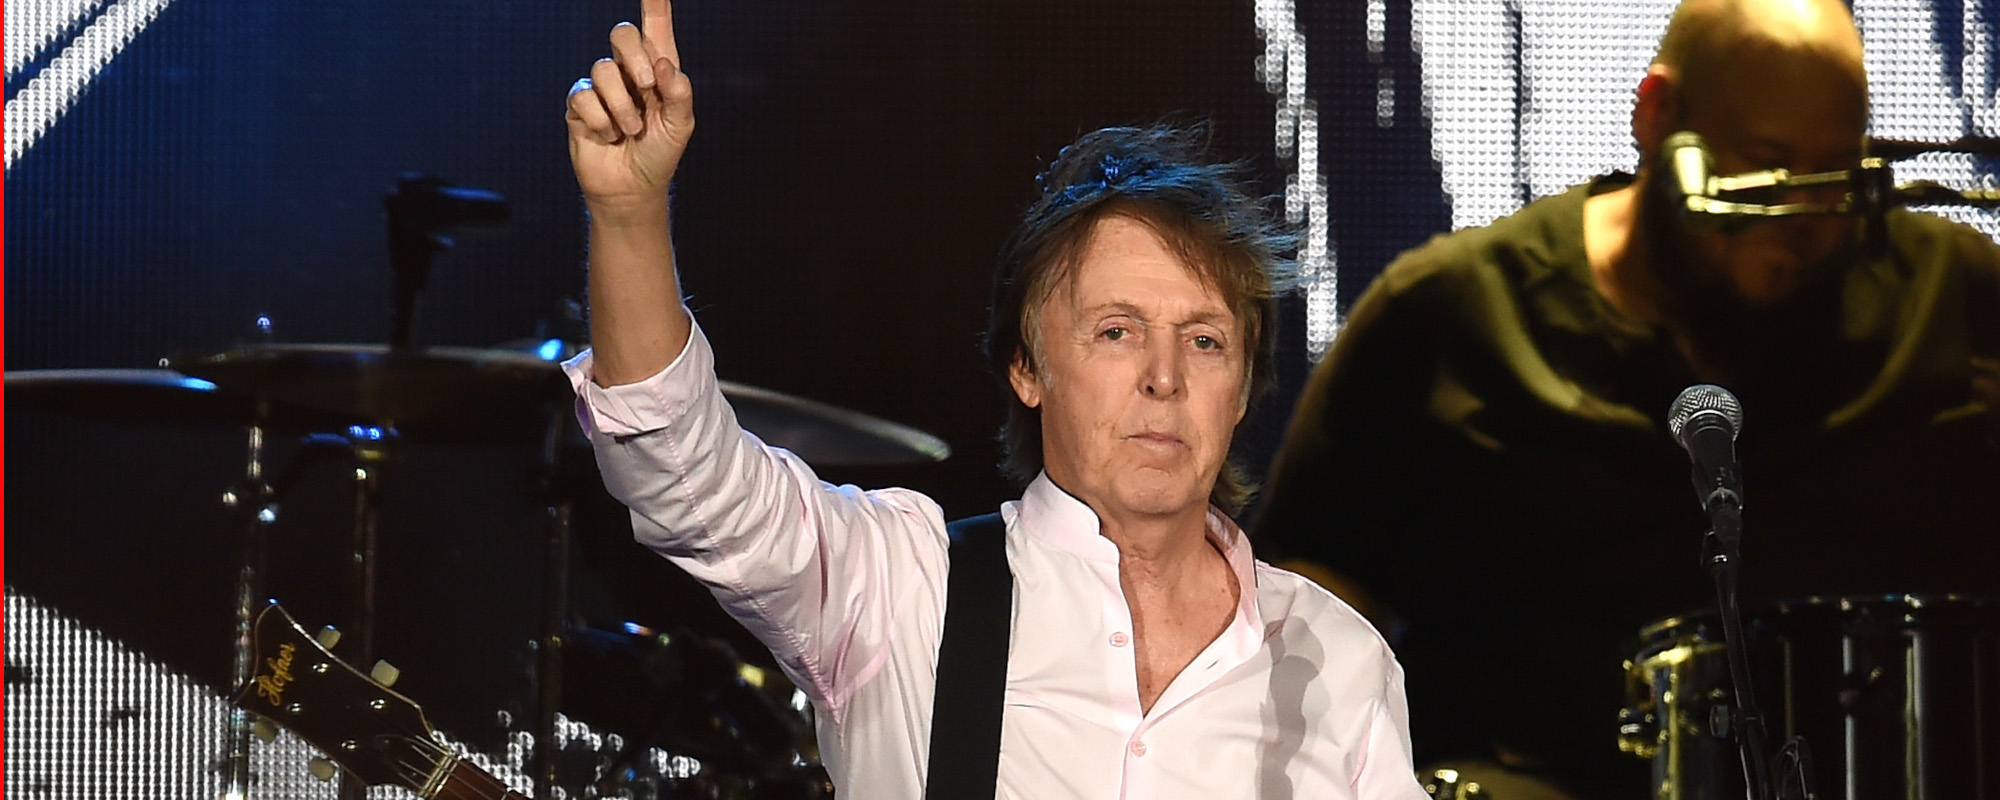 Paul McCartney Was “Very Happy” that Guns N’ Roses Covered “Live and Let Die”